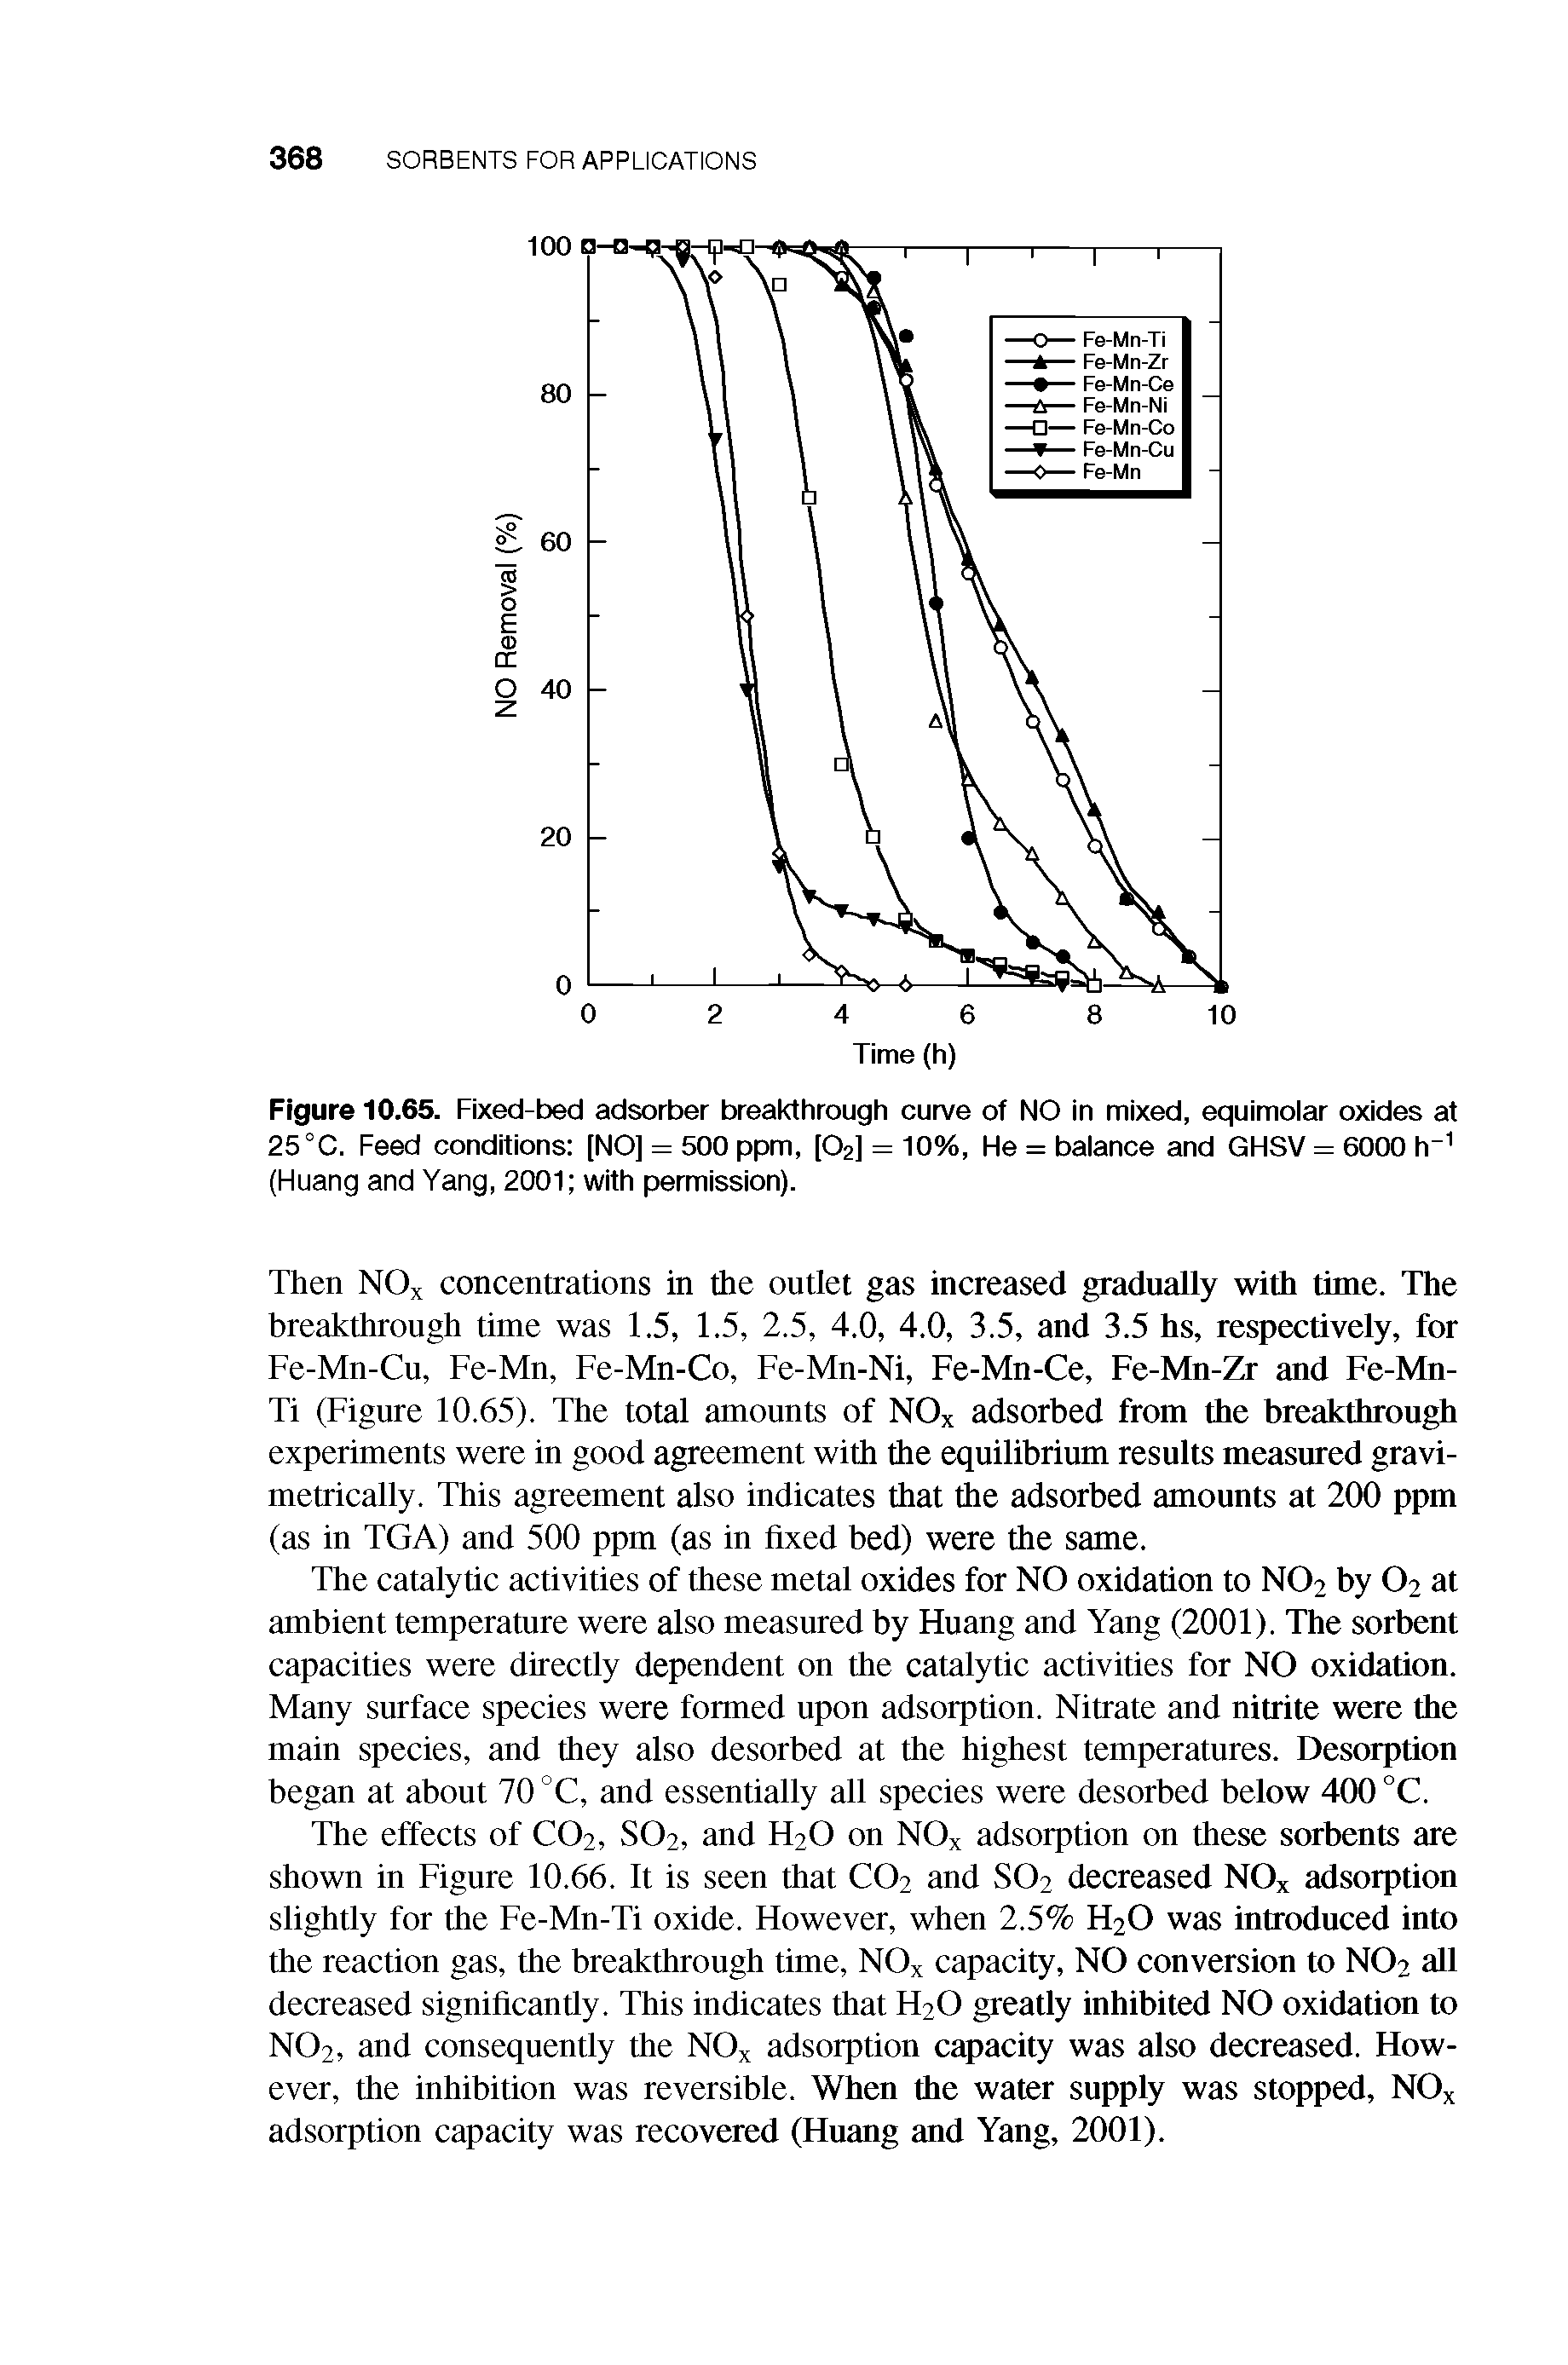 Figure 10.65. Fixed-bed adsorber breakthrough curve of NO in mixed, equimolar oxides at 25°C. Feed conditions [NO] = 500 ppm, [O2] = 10%, He = balance and GHSV = 6000 h (Huang and Yang, 2001 with permission).